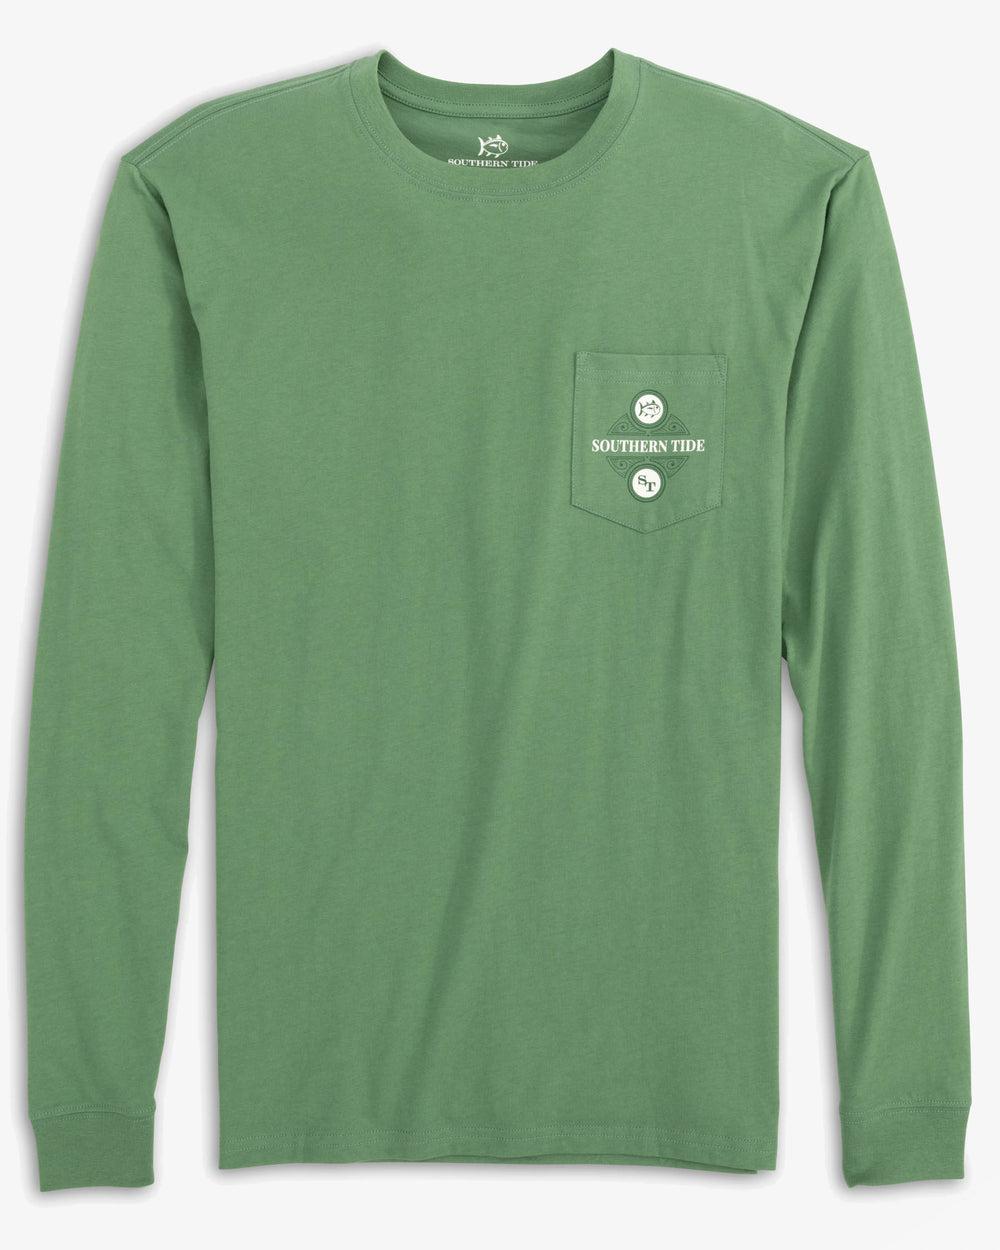 The front view of the Iron Wrought Oval Long Sleeve T-Shirt by Southern Tide - Basil Pesto